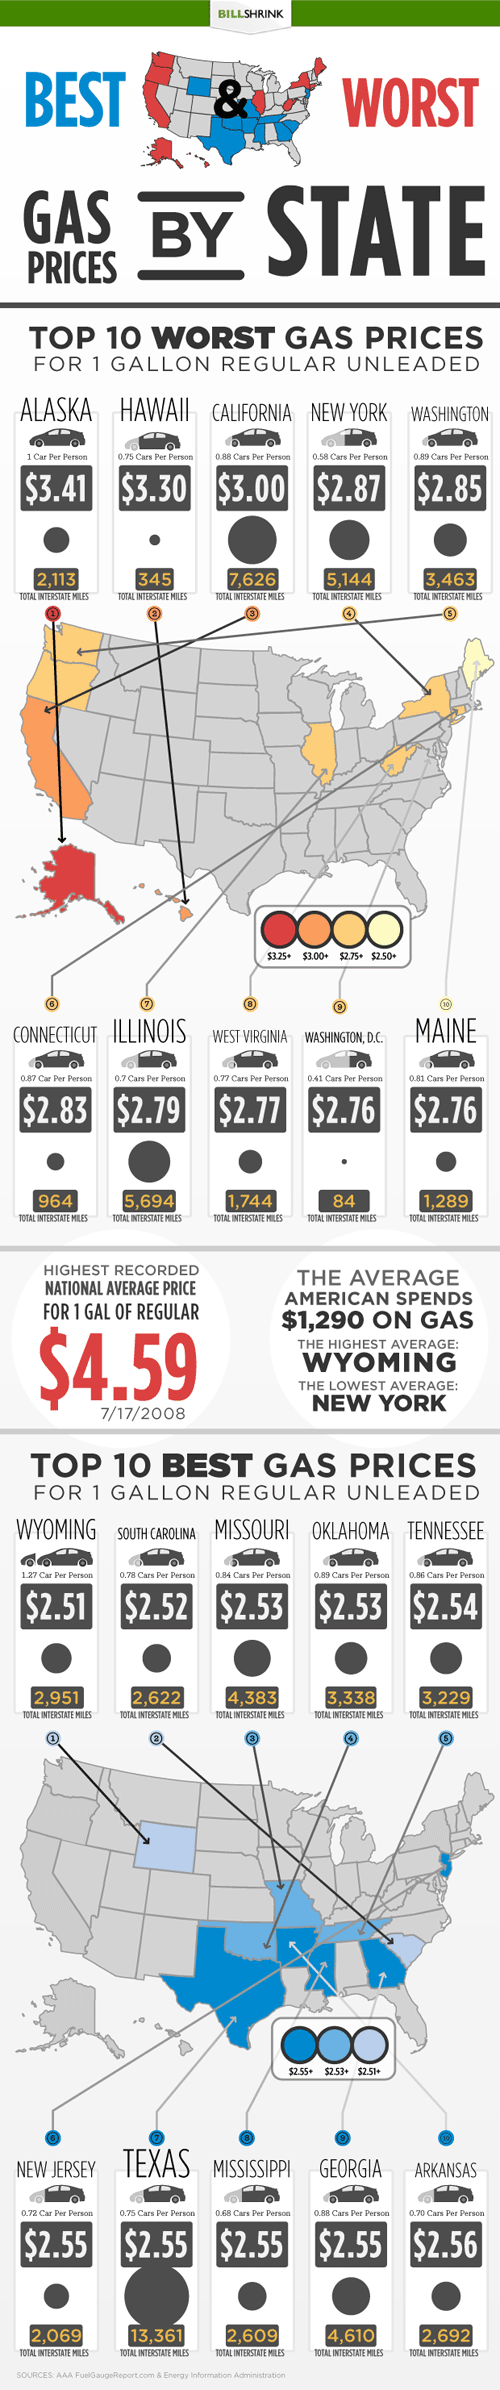 Best and Worst Gas Prices by State Infographic